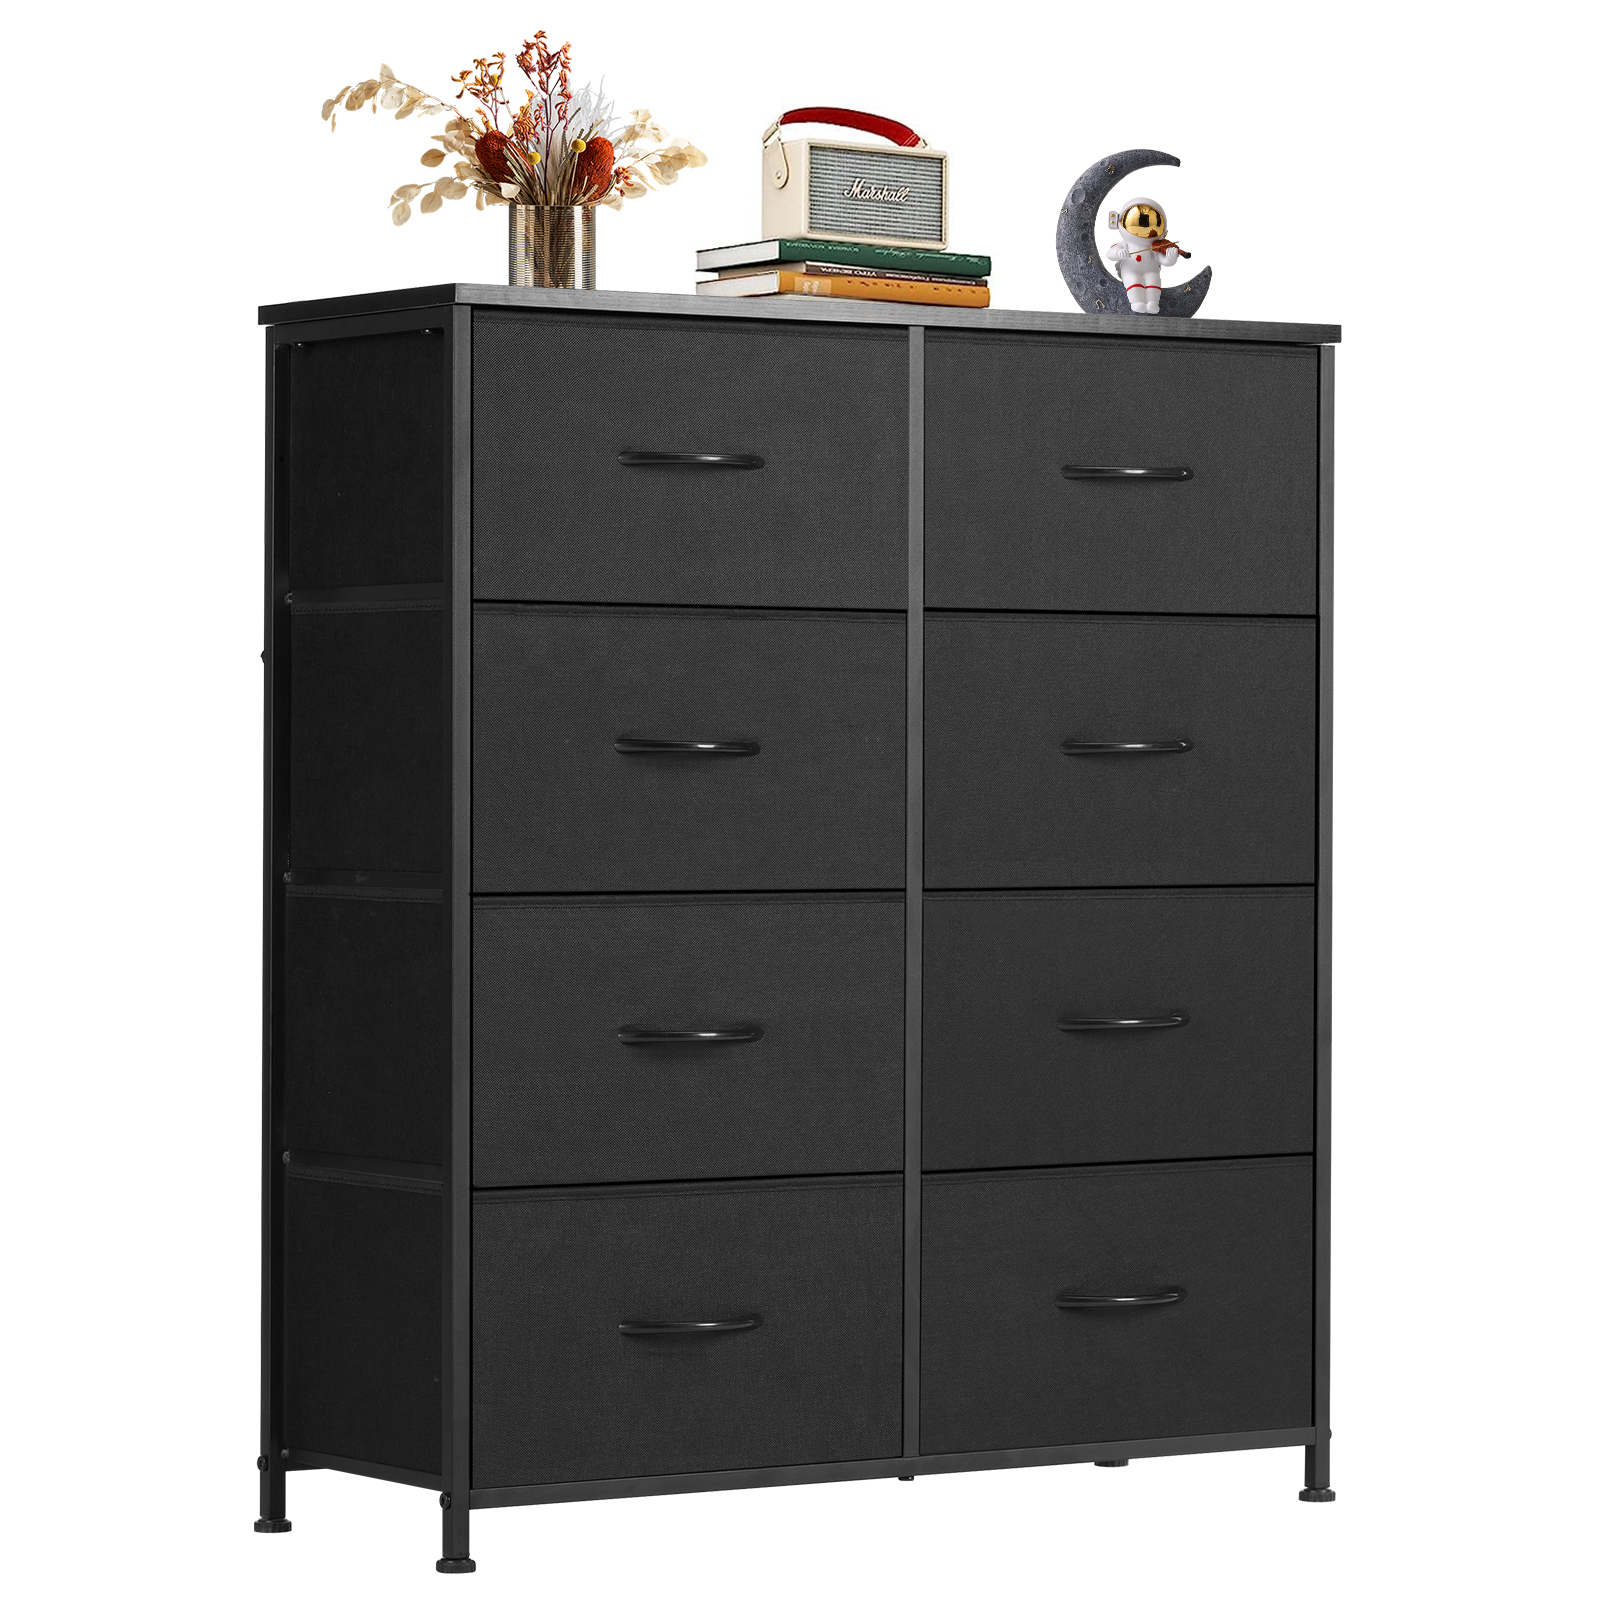 

8 Fabric Drawers Dresser, Storage Chest Organizer Units Bins, Dresser & Chest Of Drawers, Storage Tower With Fabric Cabinet, Metal Frame Portable Furniture For Livingroom, Bedroom, Lab